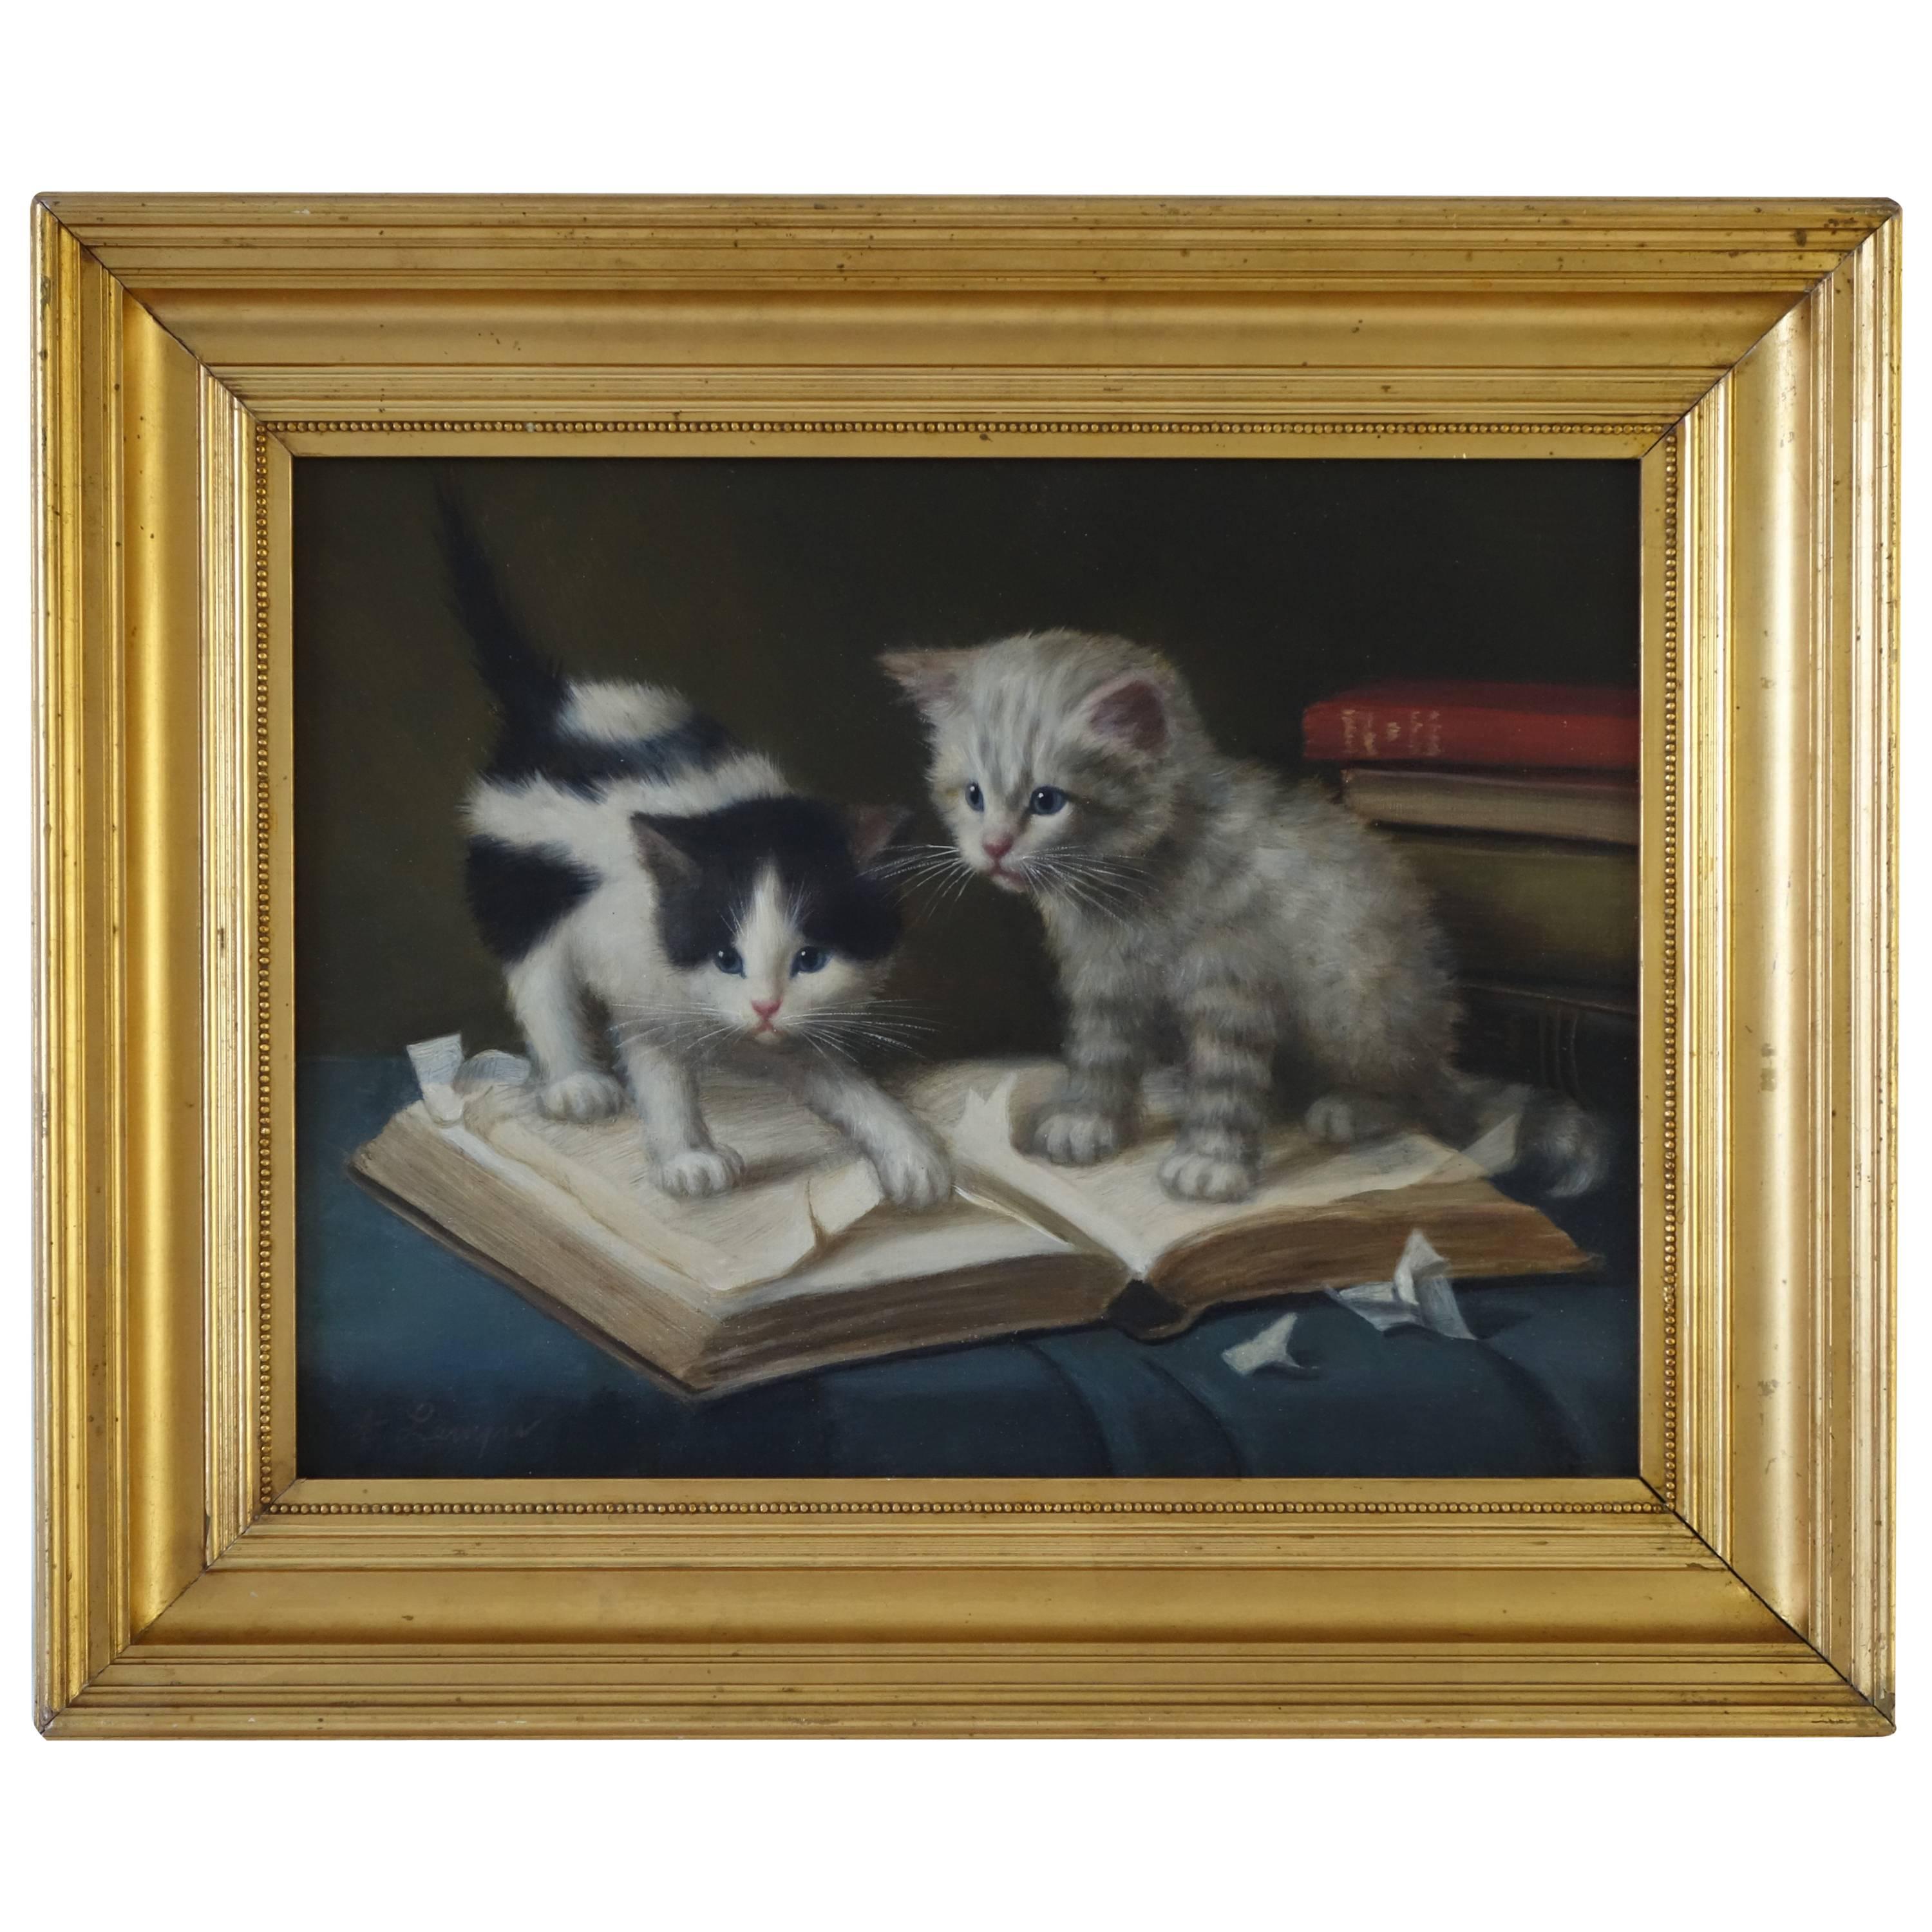 20th Century, Two Cats Playing with a Book, Amanda Lampe